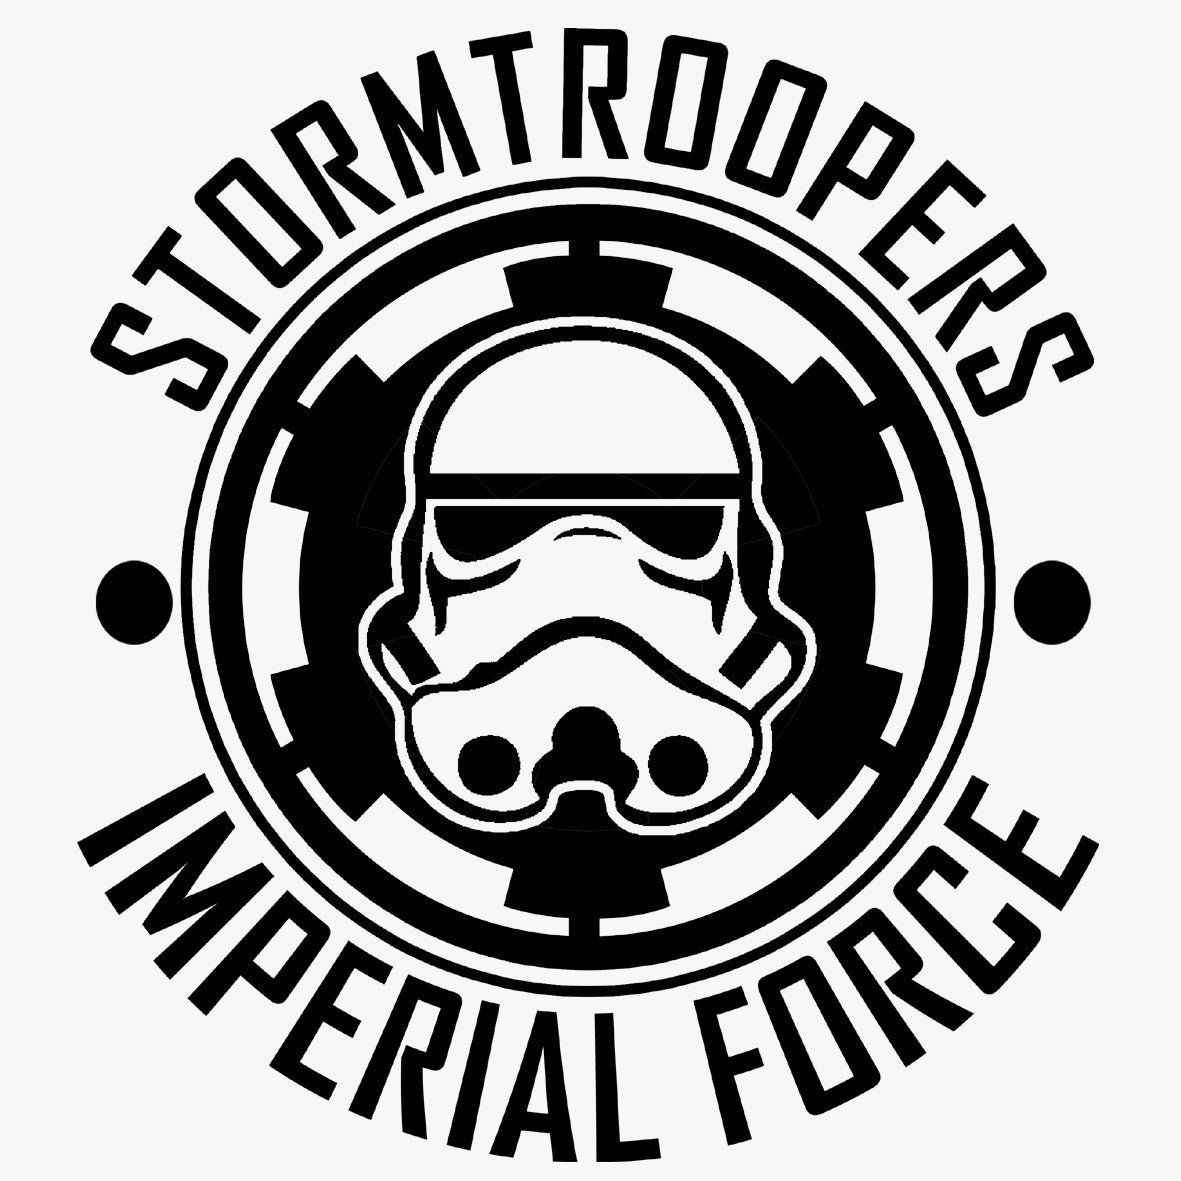 stormtroopers – CENTRAL T-SHIRTS